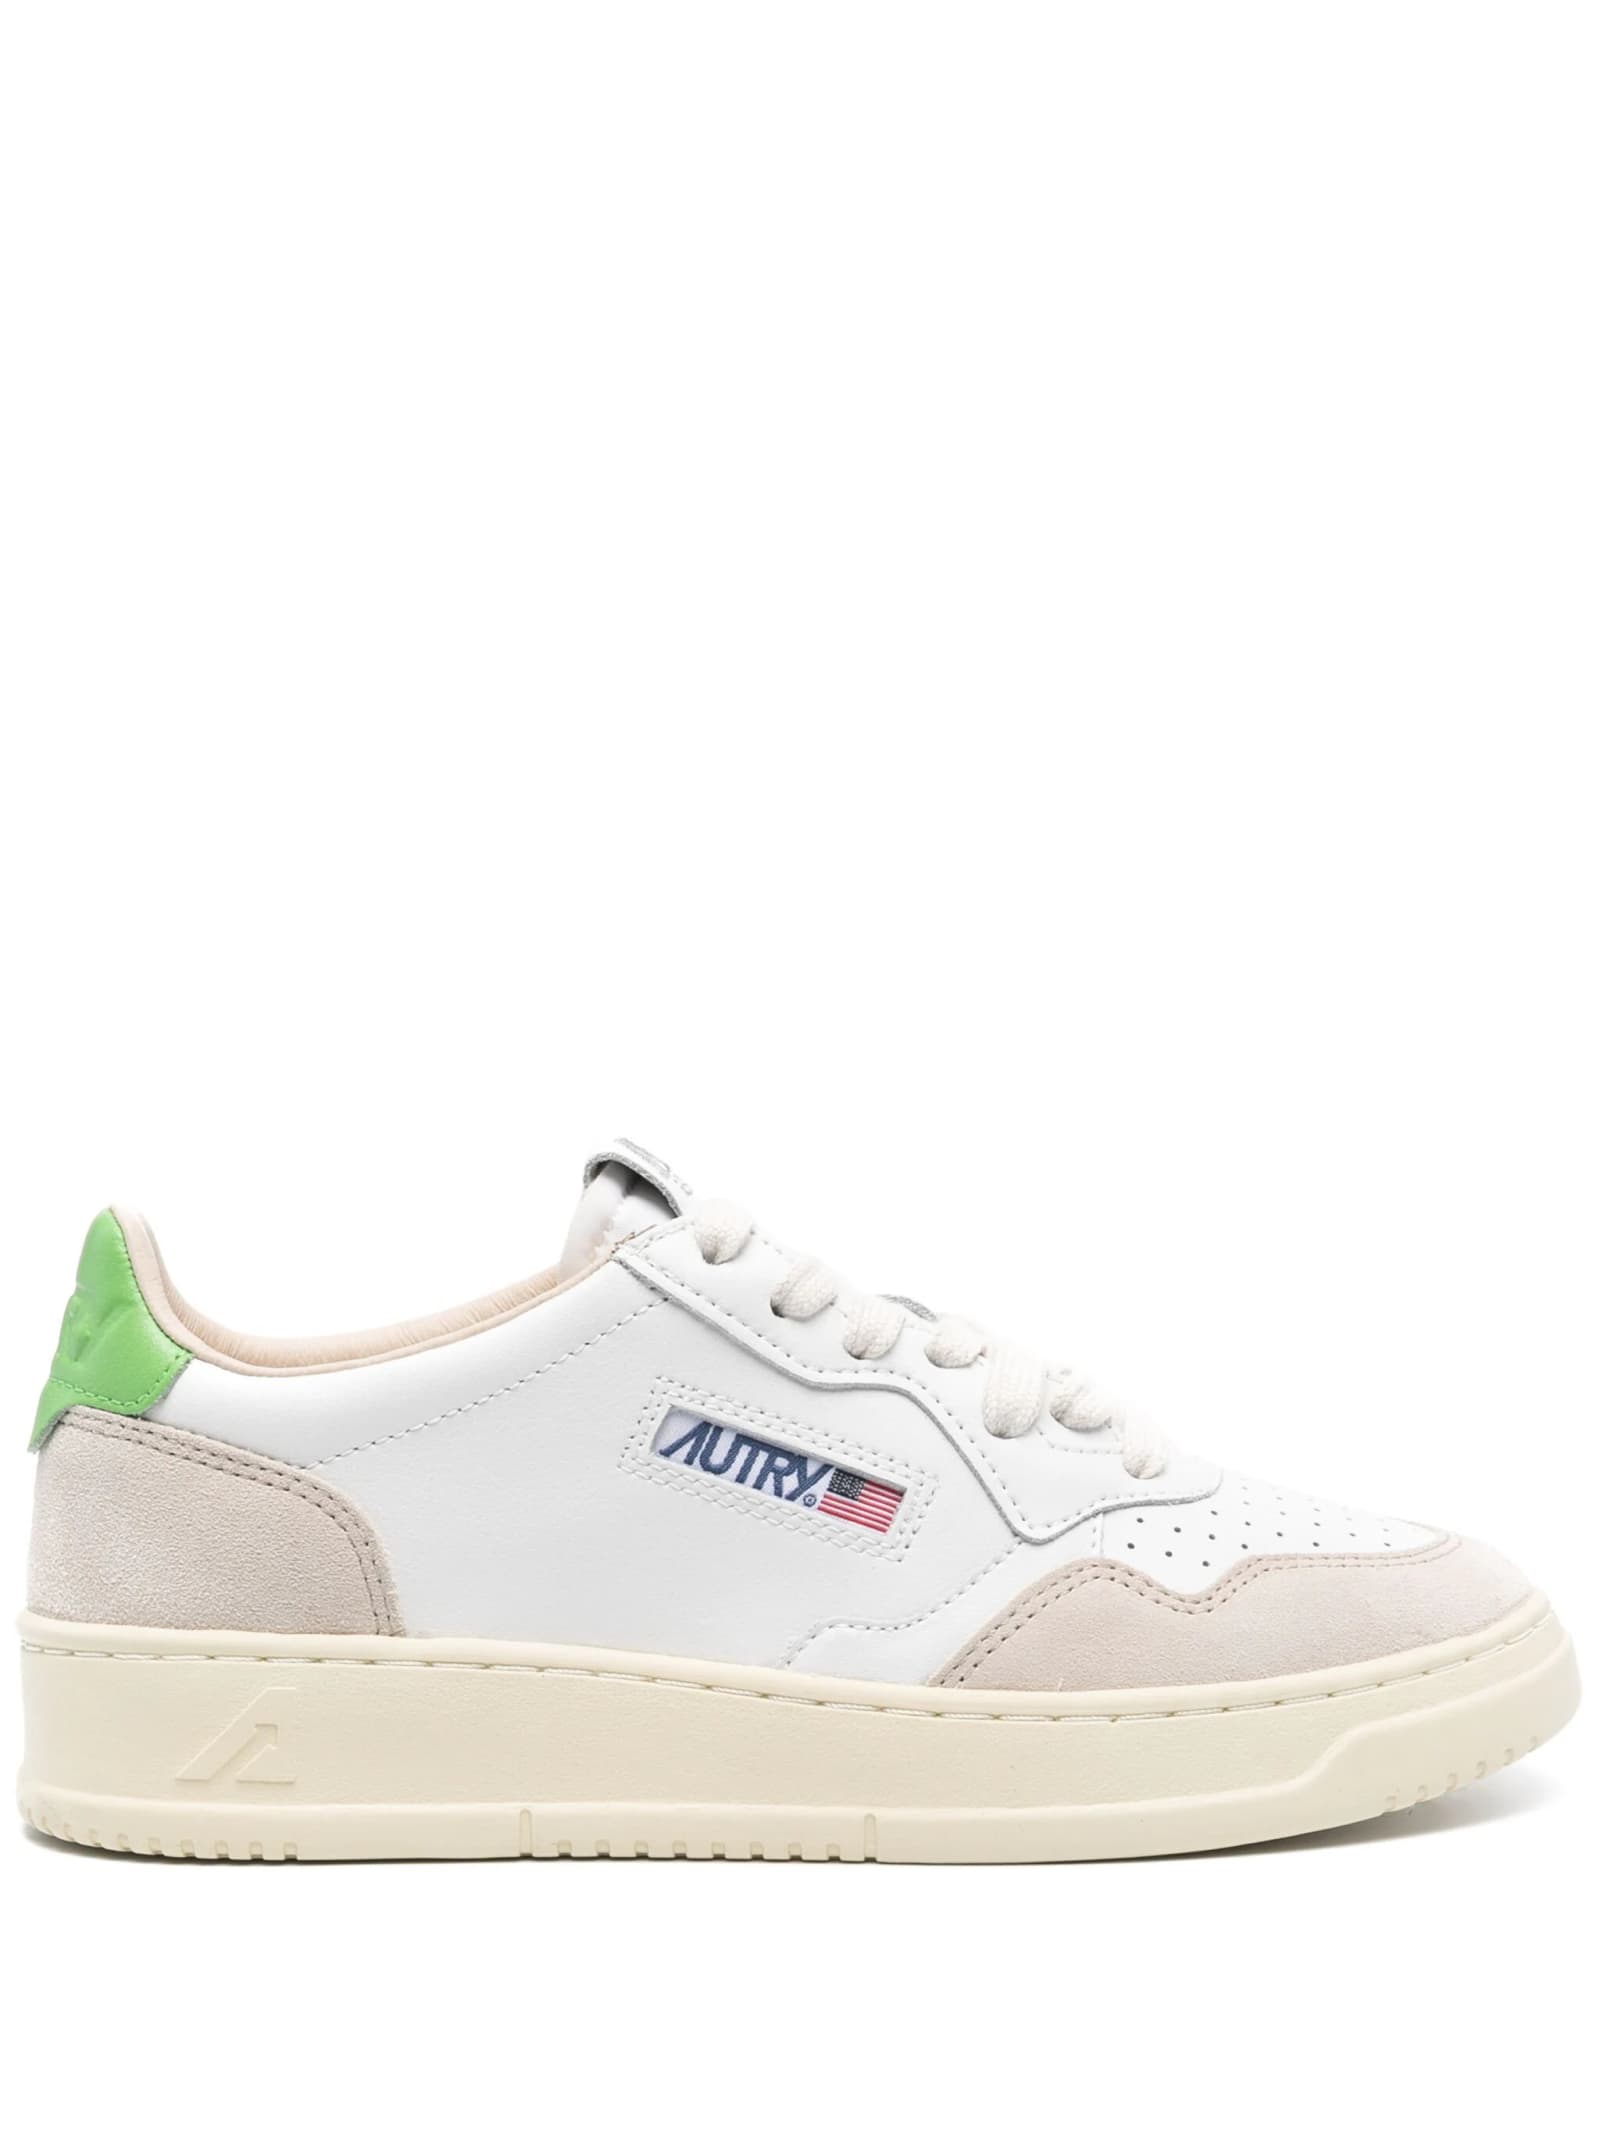 Autry Medalist Low Sneakers In White And Green Suede And Leather